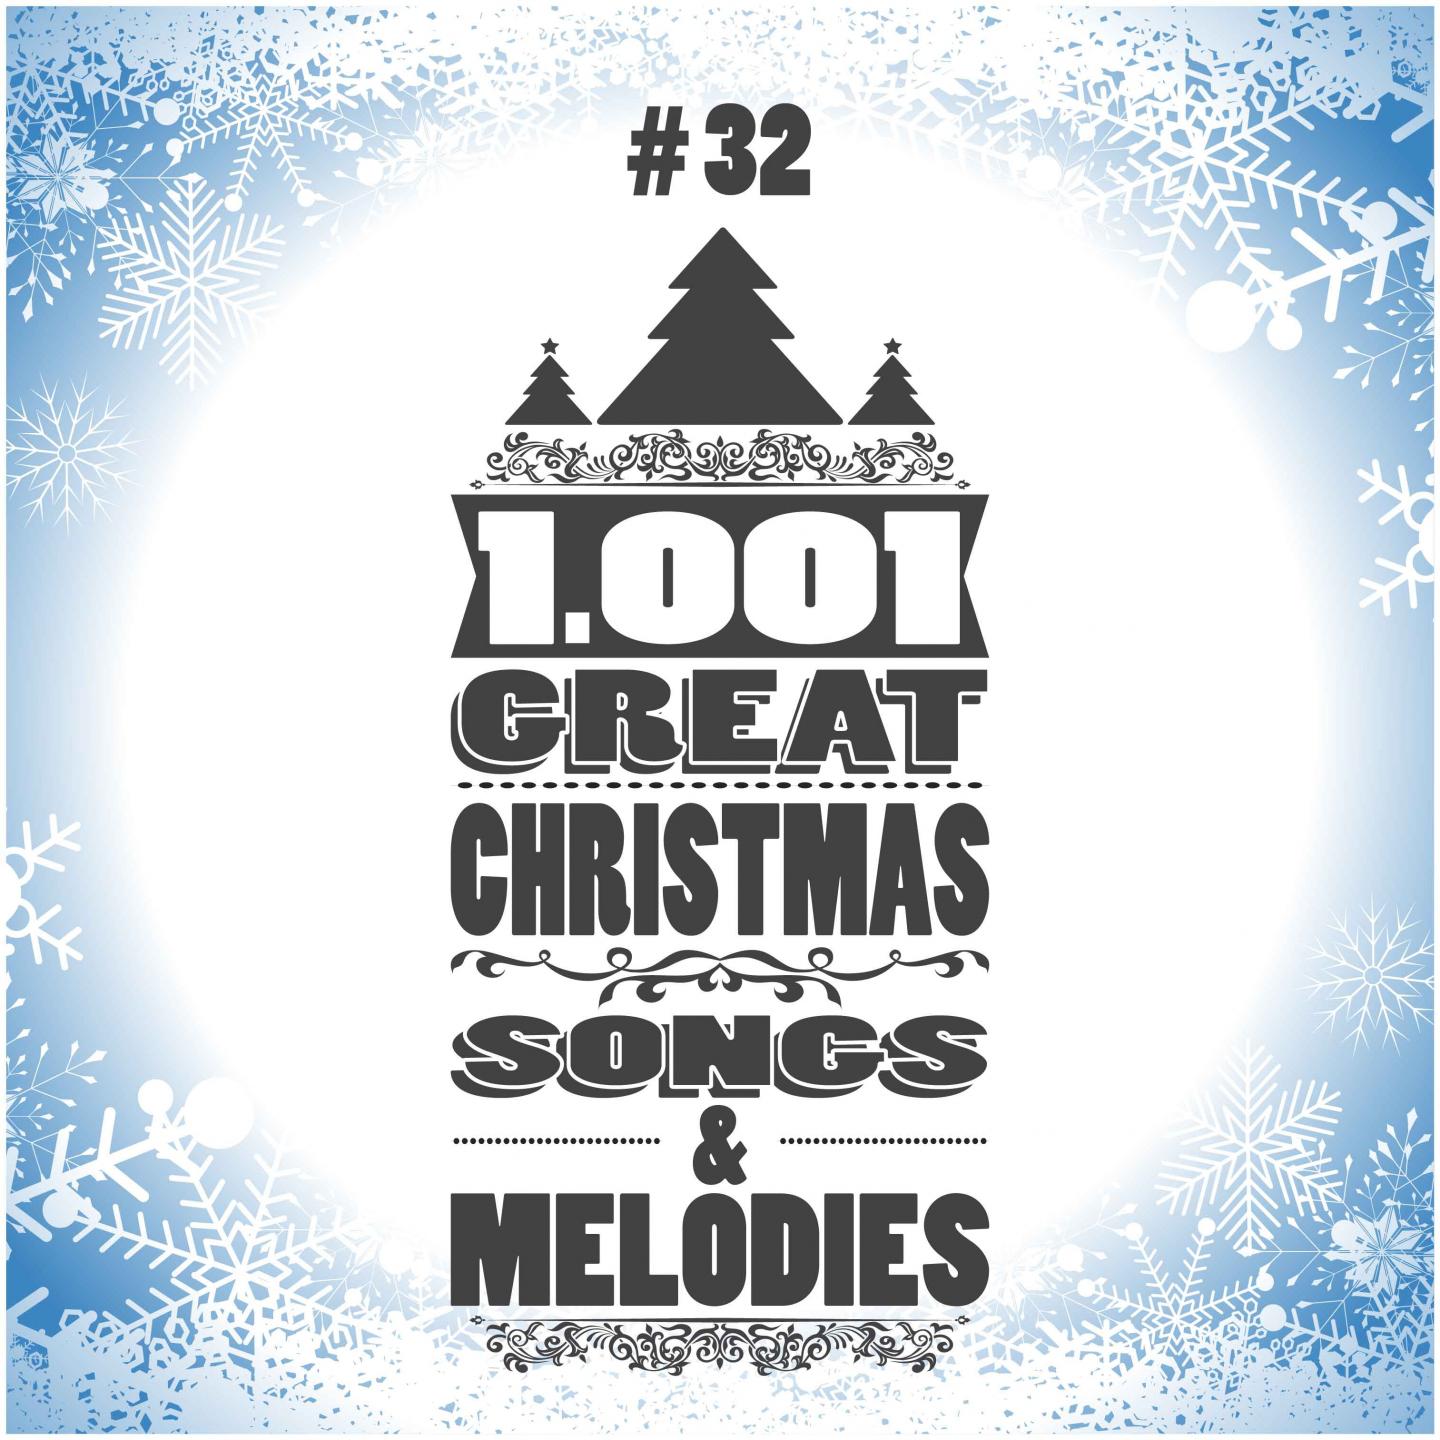 1001 Great Christmas Songs & Melodies, Vol. 32